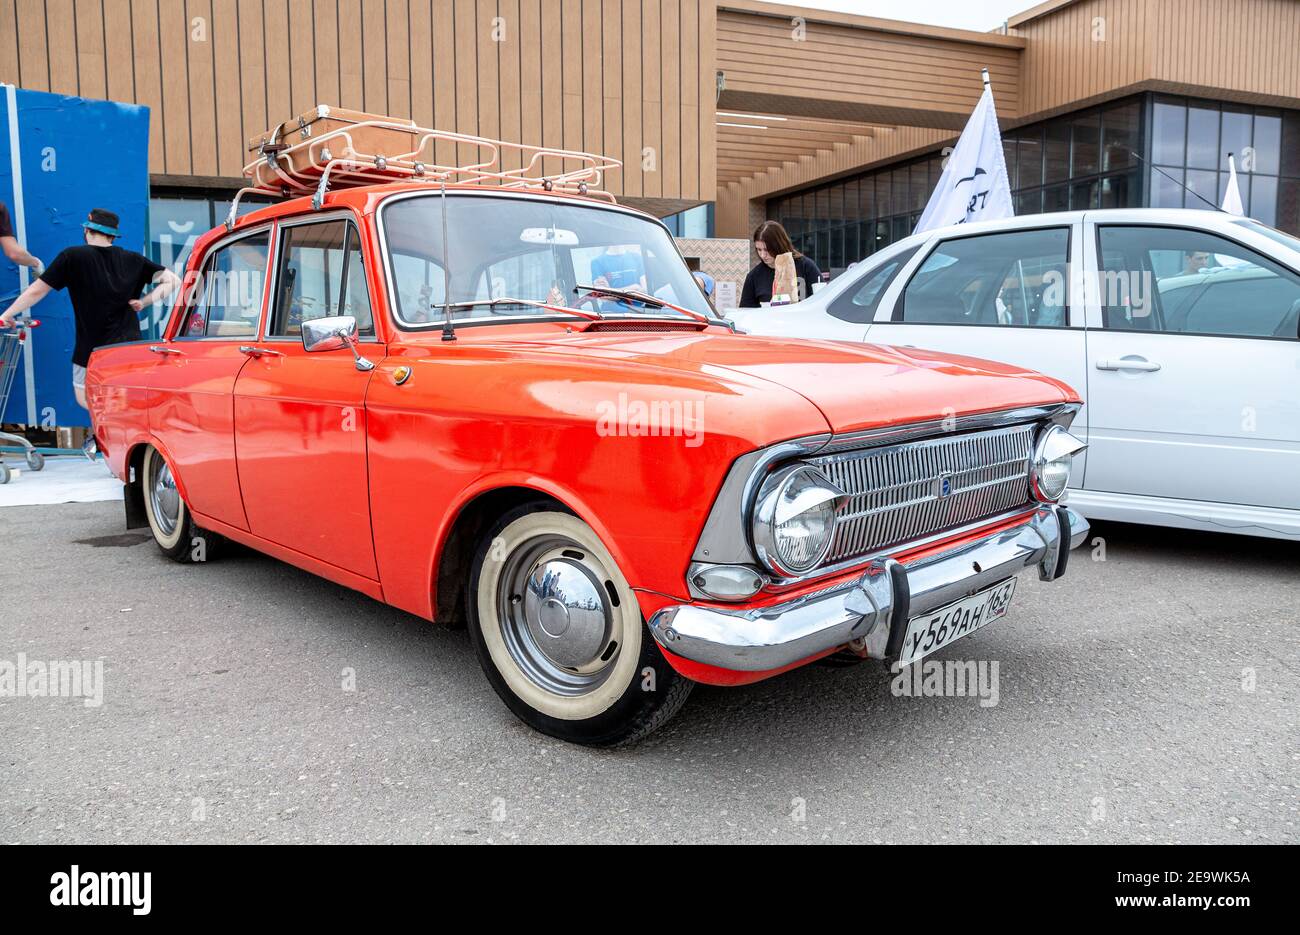 Samara, Russia - May 19, 2018: Vintage Russian automobile Moskvich-412 at the parade of old cars and motor show Stock Photo